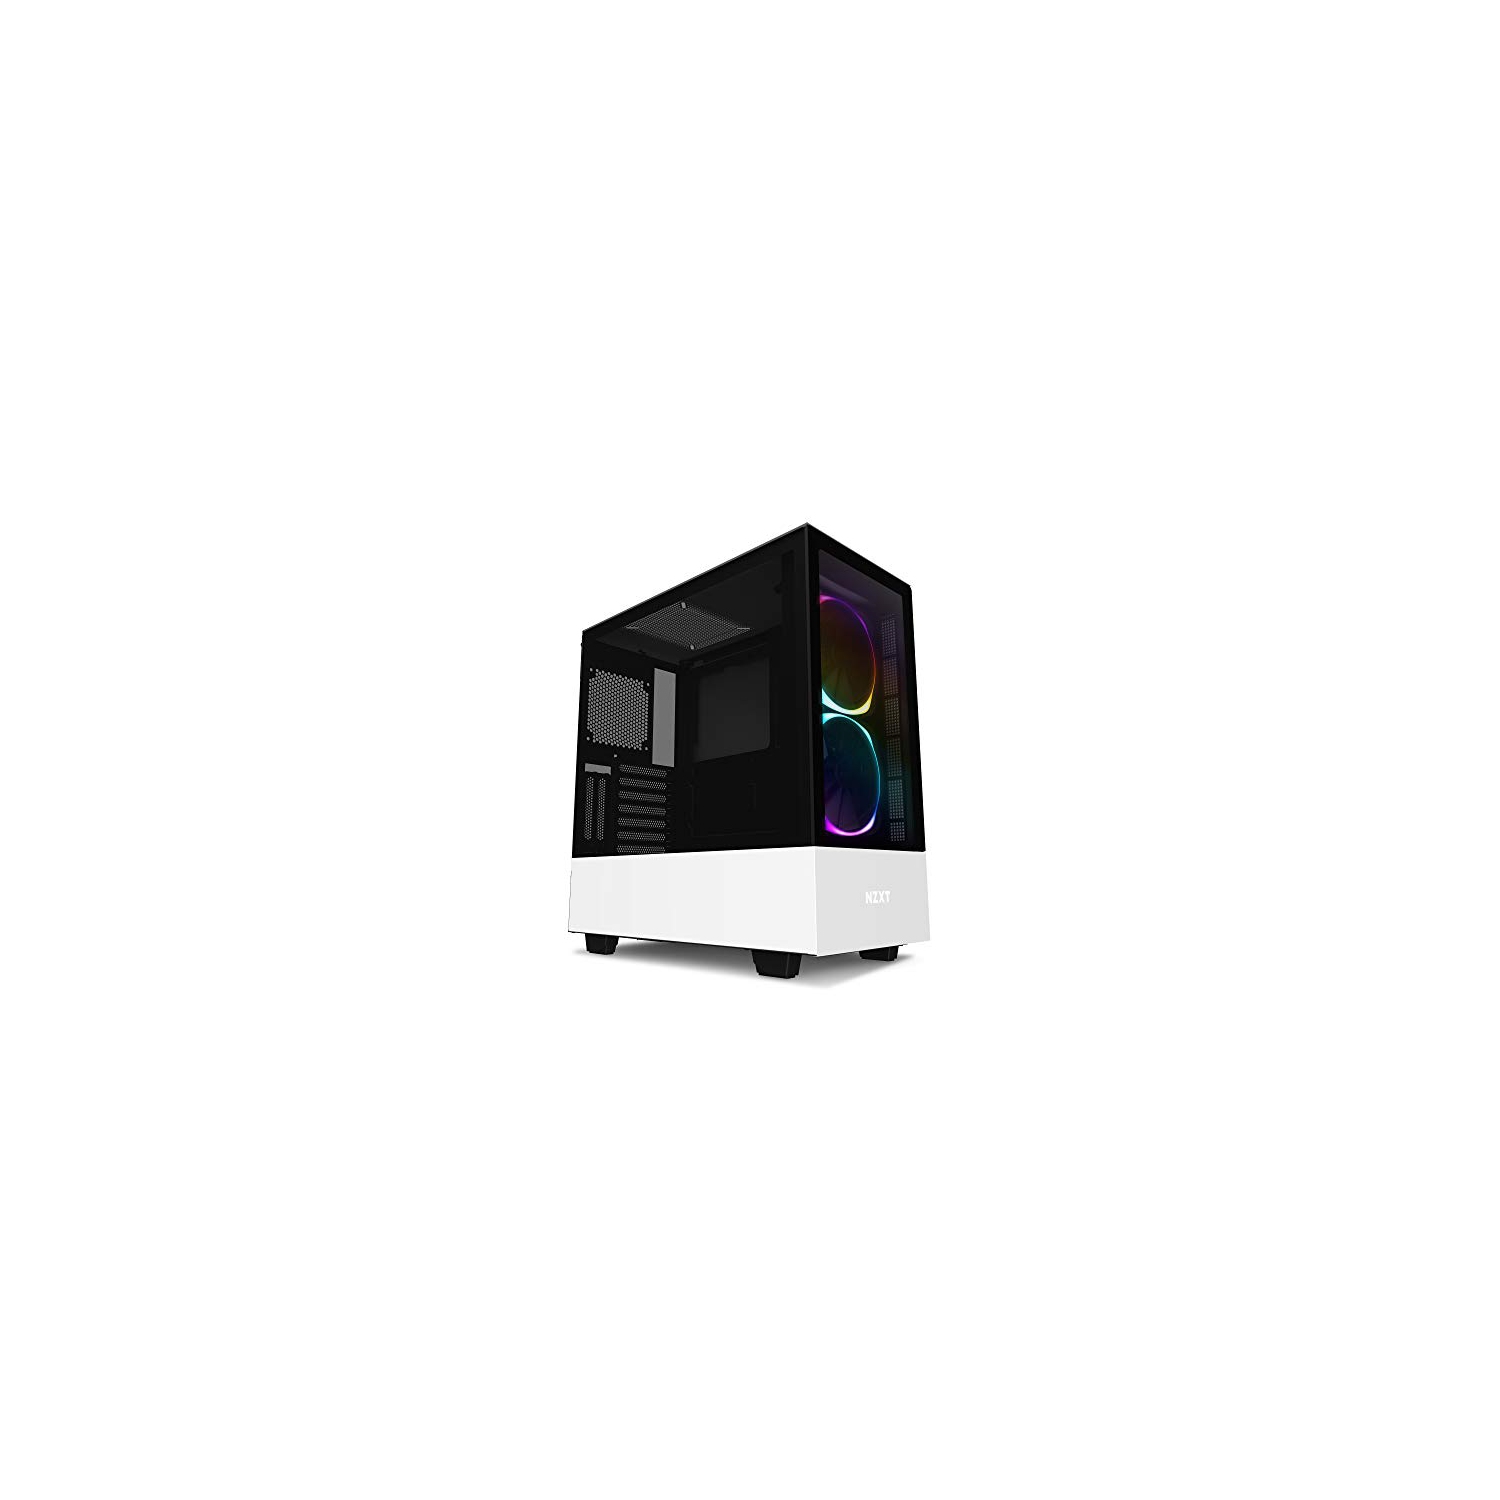 NZXT H510 Elite - Premium Mid-Tower ATX Case PC Tempered Glass Vertical GPU Mount, Integrated RGB Lighting, Water Cooling